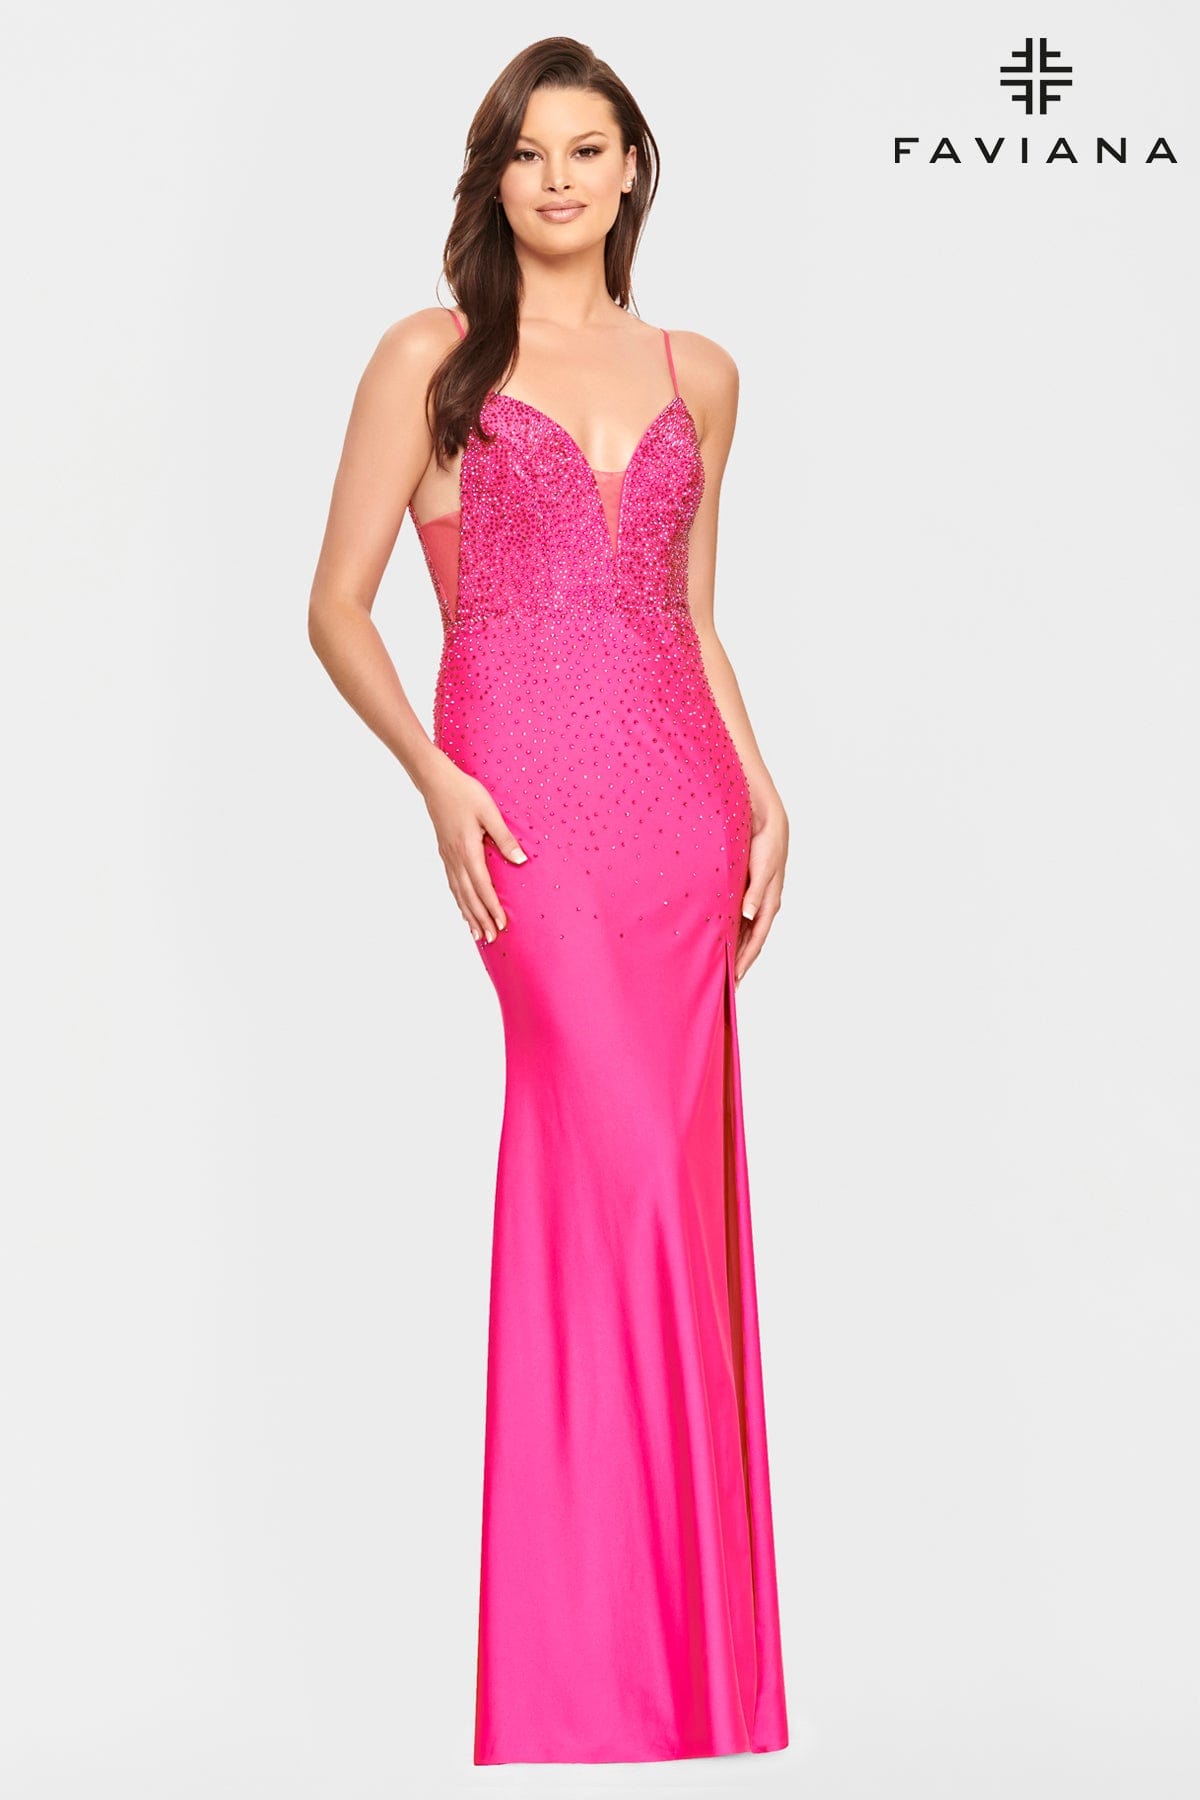 Tight Long Beaded Prom Dress With Deep V Neck And Mesh Side Panels ...